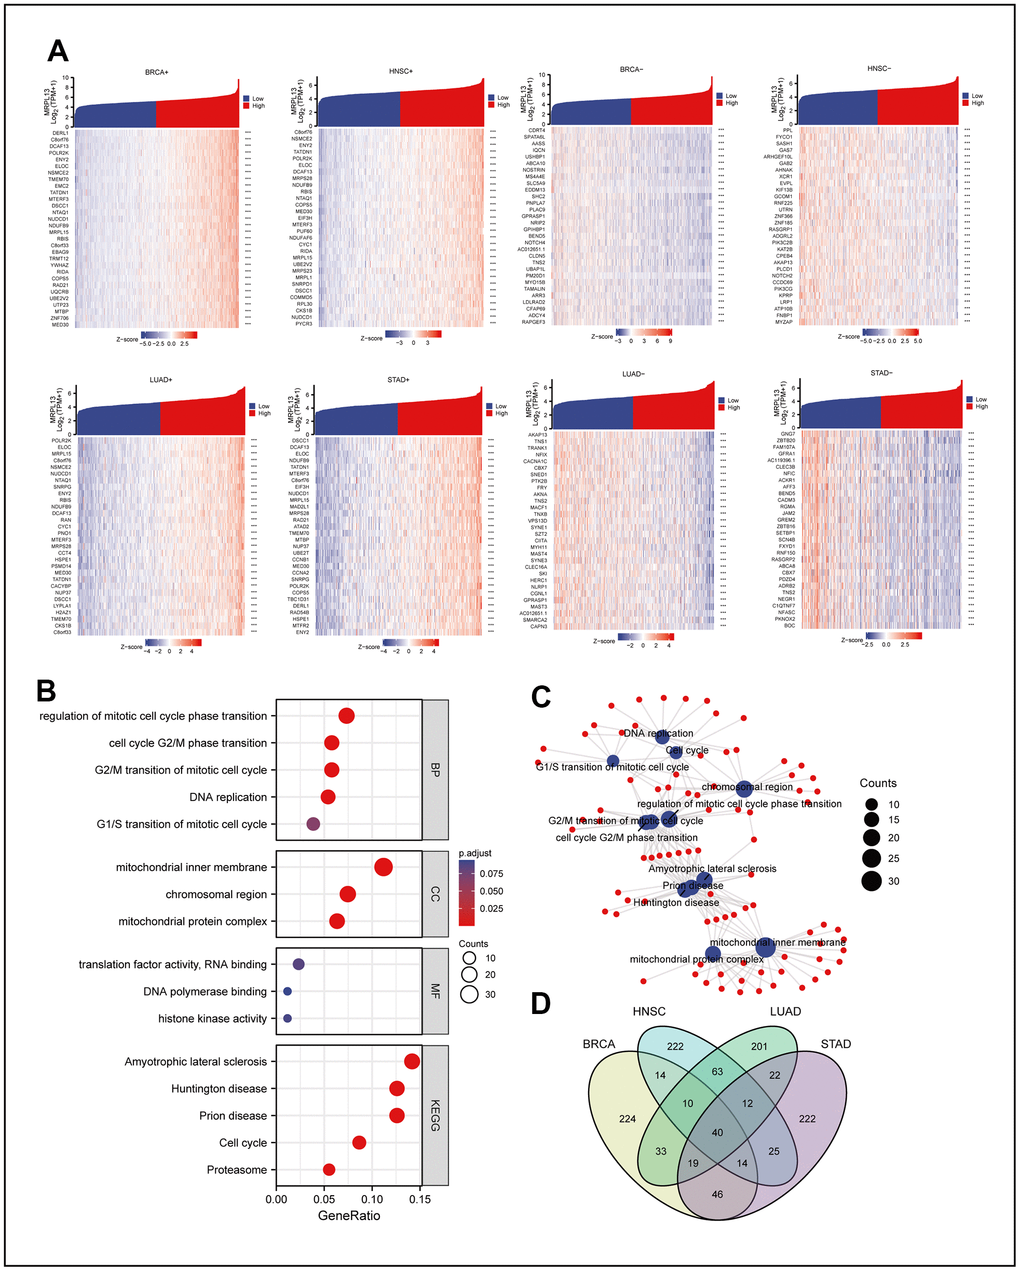 Co-expression network analysis of MRPL13 in pan-cancer and co-expression network enrichment analysis. (A) The top 30 positive and negative genes related to the expression of MRPL13 in BRCA, LUAD, HNSC and STAD. (B) GO and KEGG analyses for genes related to the expression of MRPL13 in at least two cancers (C) the result of GO and KEGG analyses visualize with R language pack ggplot2 (red: molecular: blue: enrichment results). (D) Veen map shows the intersection of genes related to the expression of MRPL13 in BRCA, LUAD, HNSC and STAD.